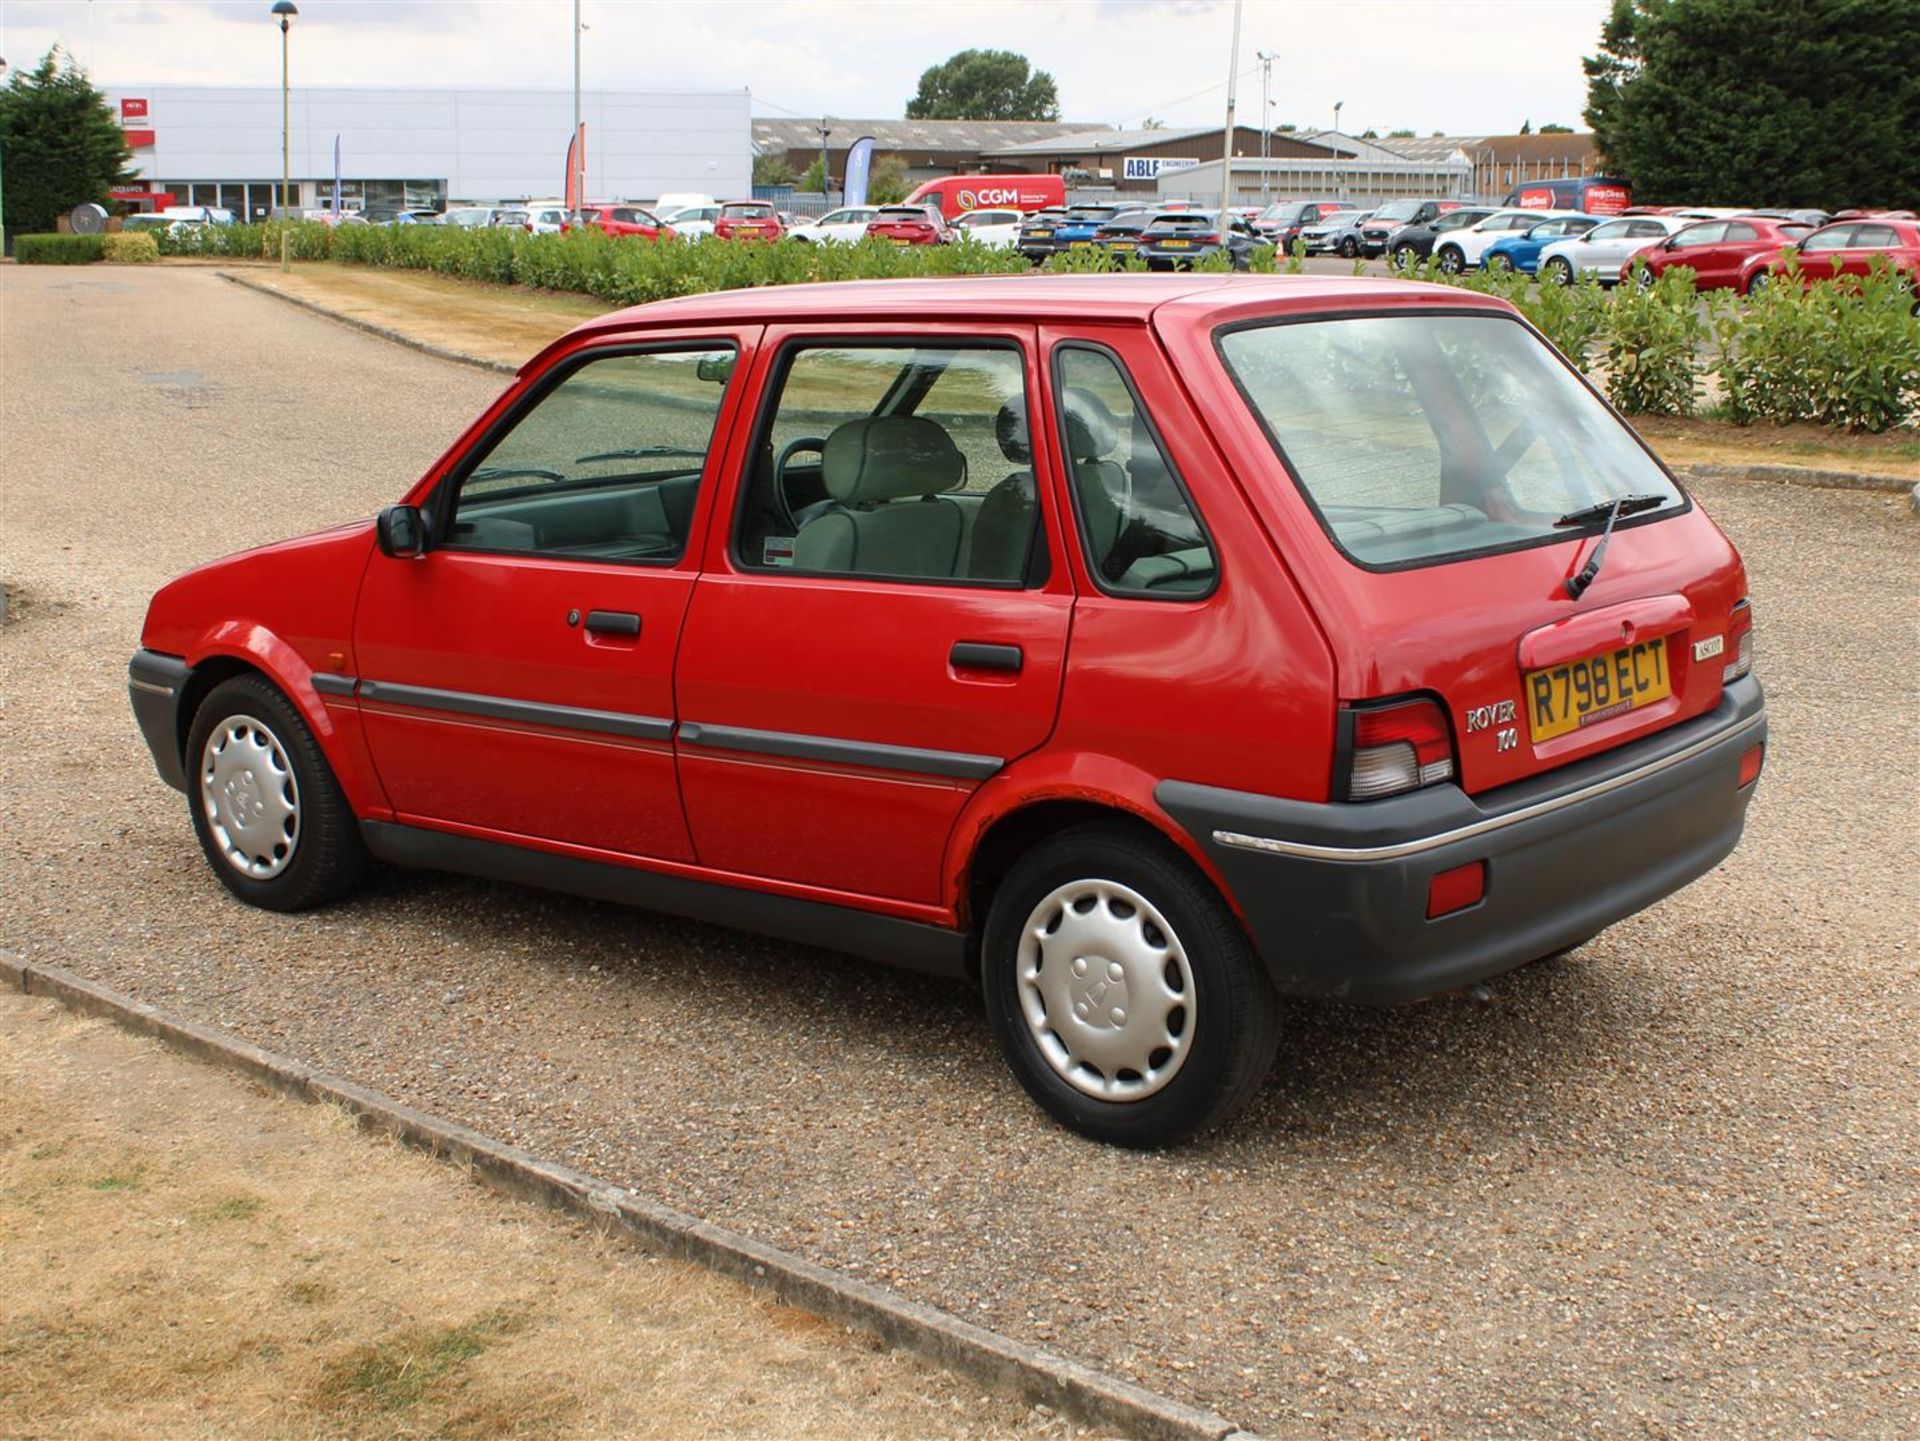 1997 ROVER 100 ASCOT - Image 5 of 29